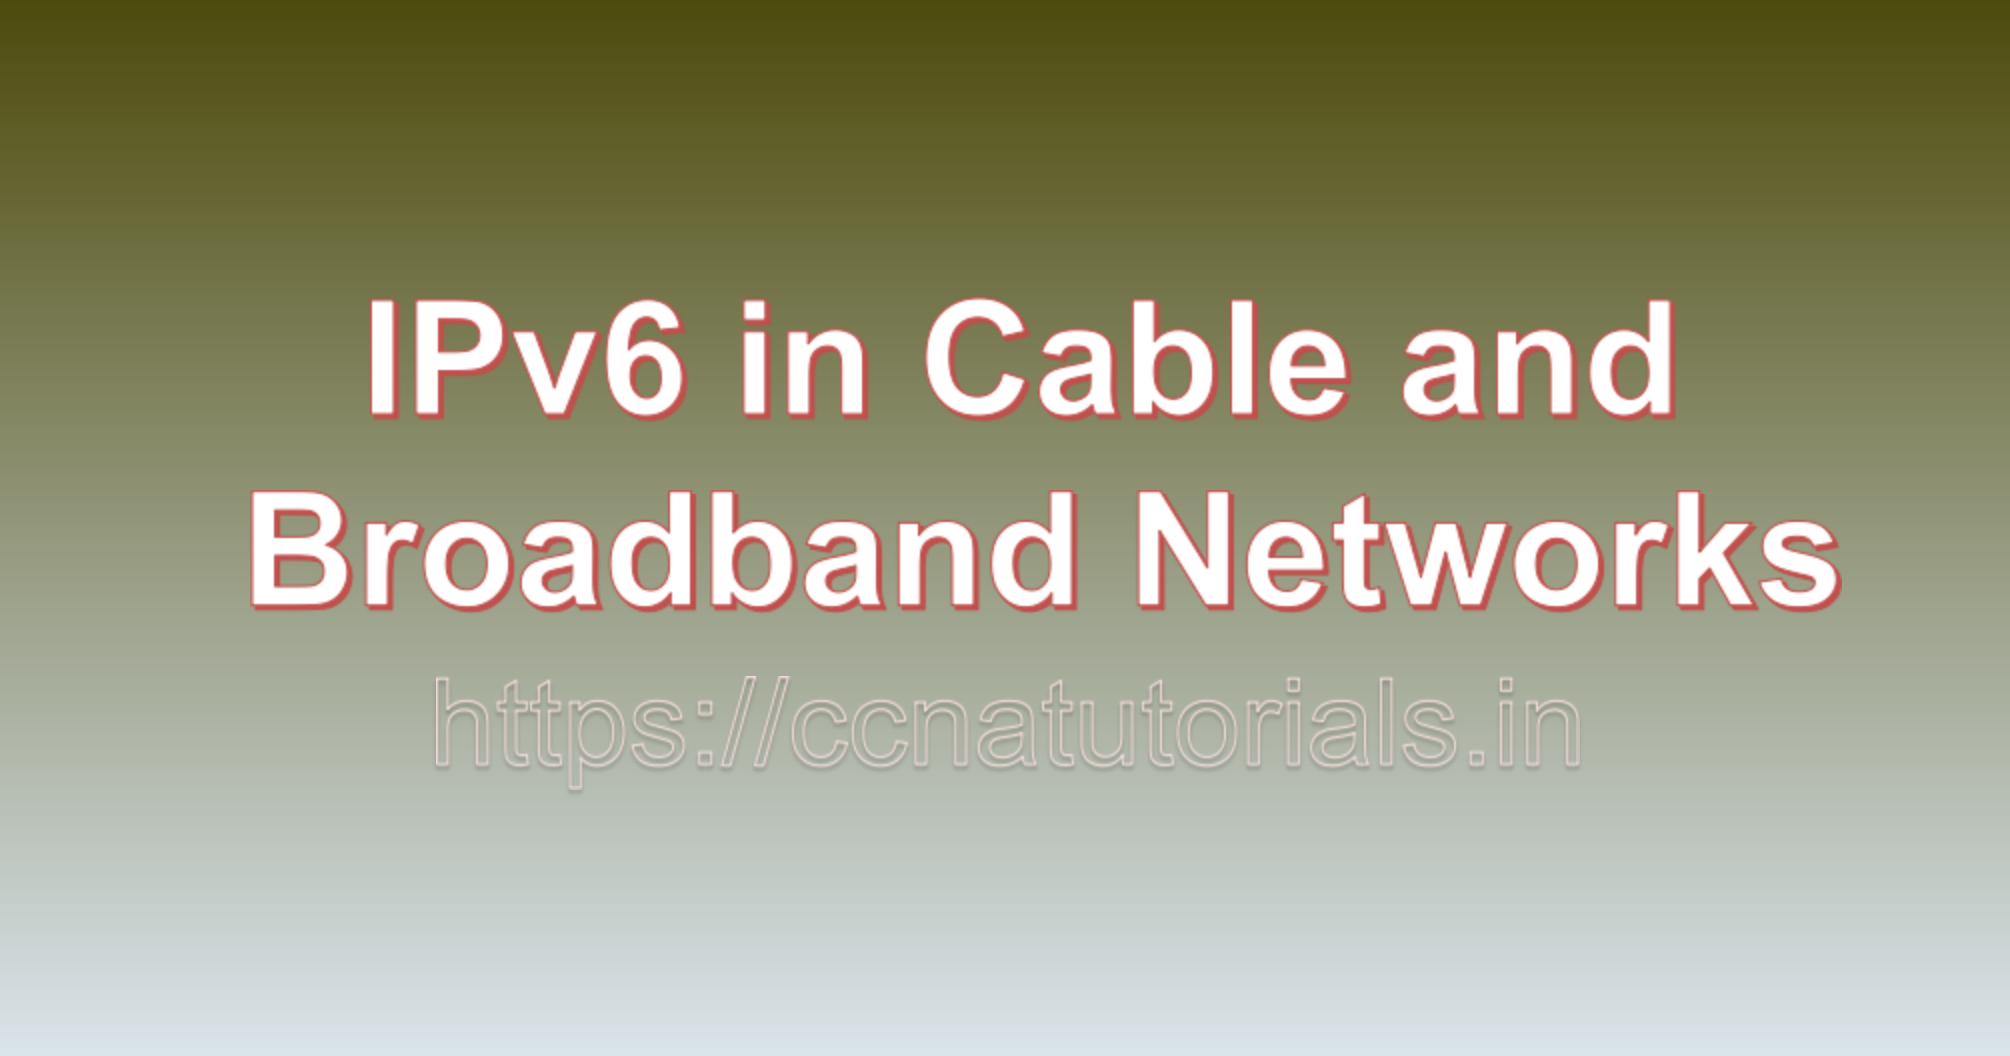 IPv6 in Cable and Broadband Networks, ccna, ccna tutorials